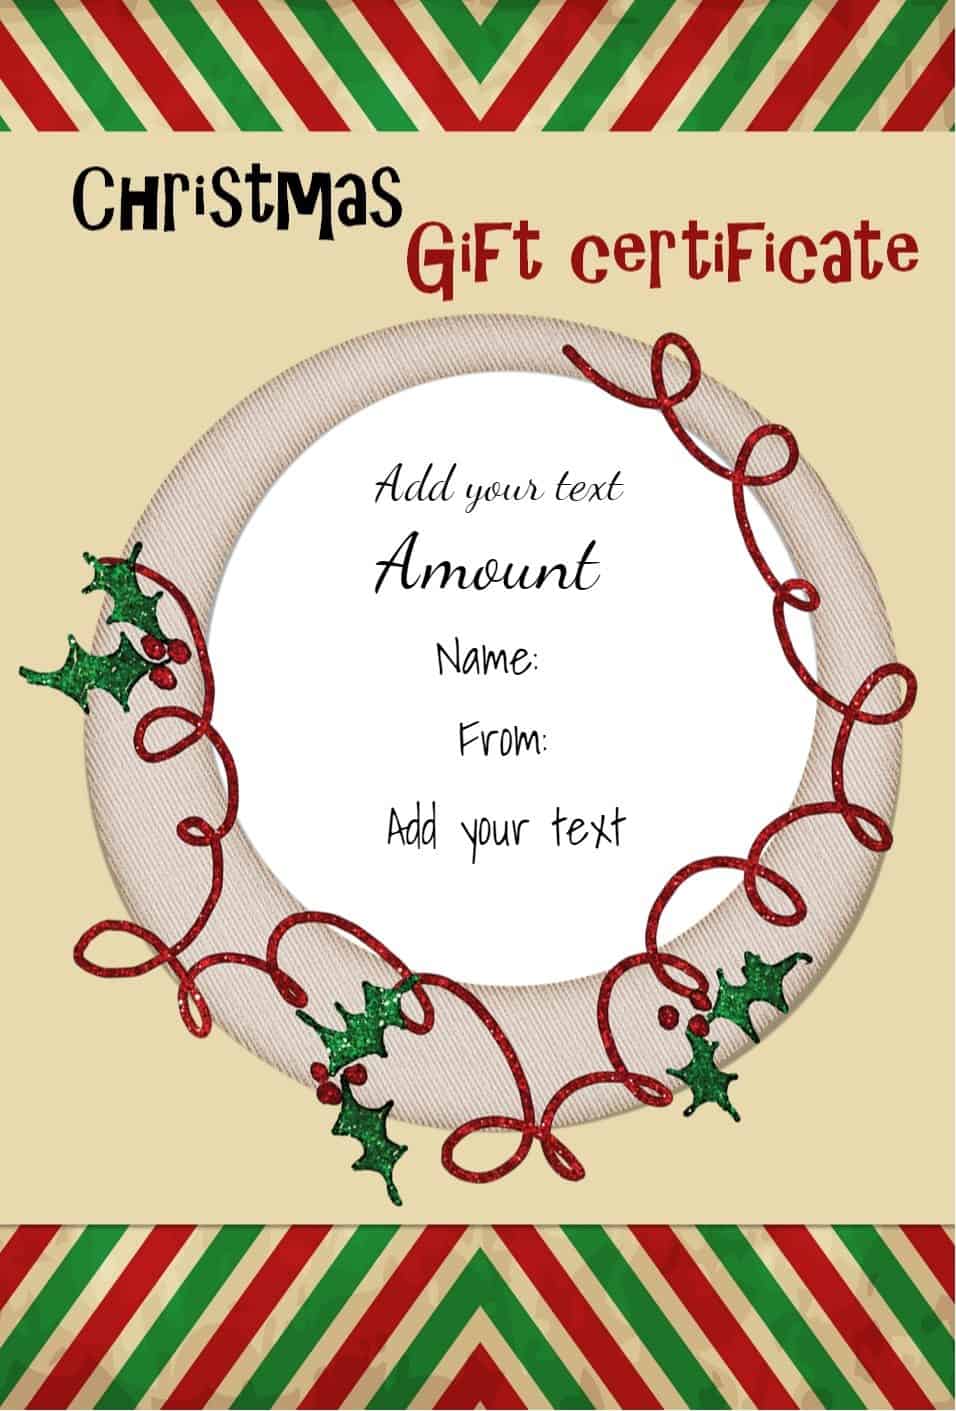 FREE Christmas Gift Certificate Template Customize Download